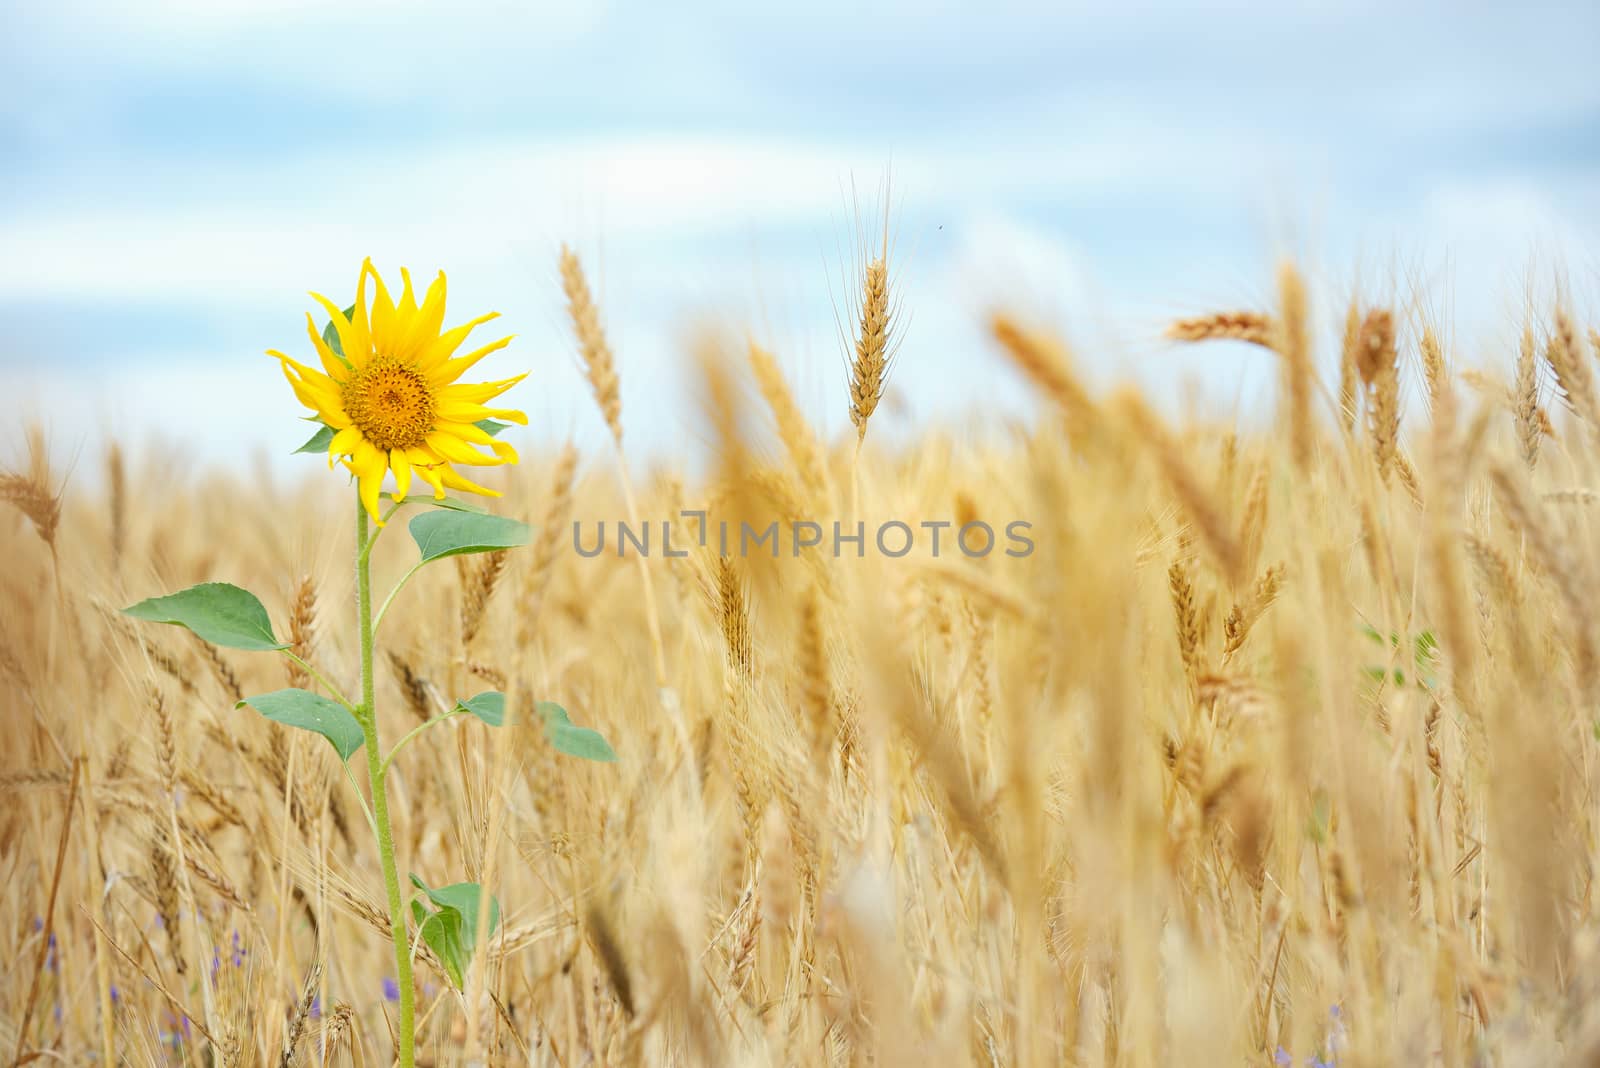 Sunflower isolated in wheat field and blue sky